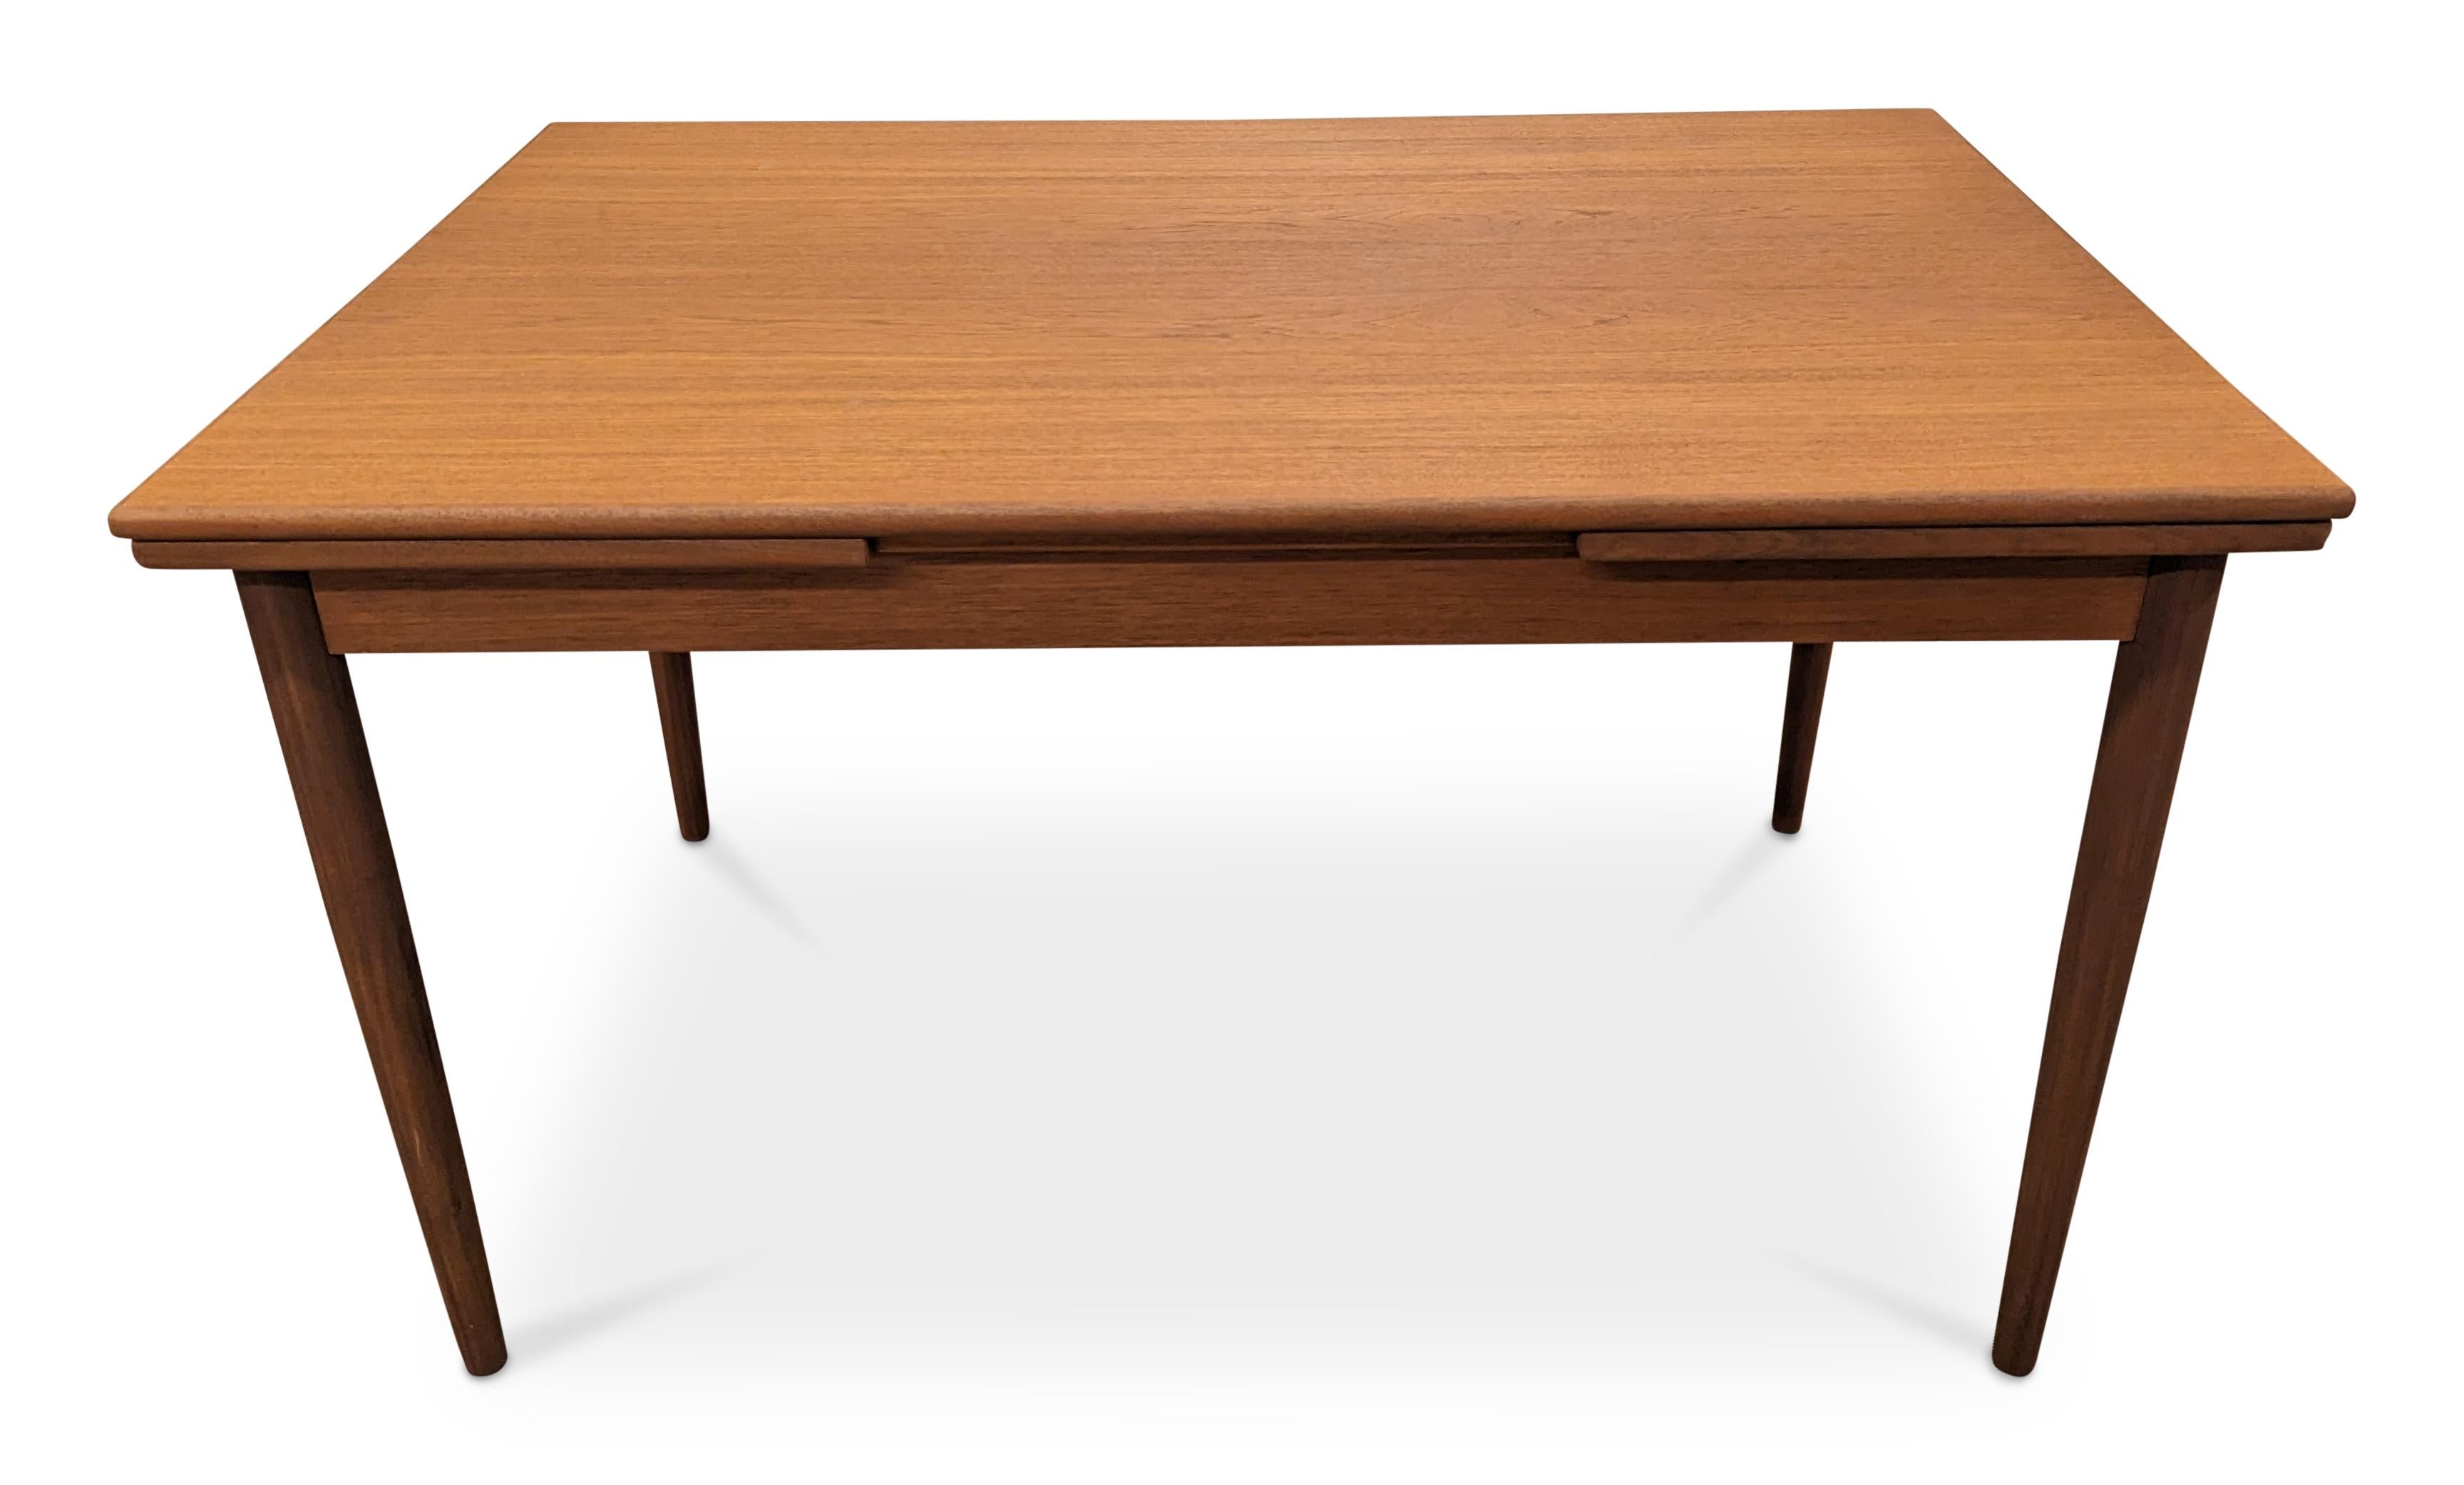 Teak Dining Table w Two Hidden Leaves - 022428 Vintage Danish Modern In Good Condition For Sale In Jersey City, NJ